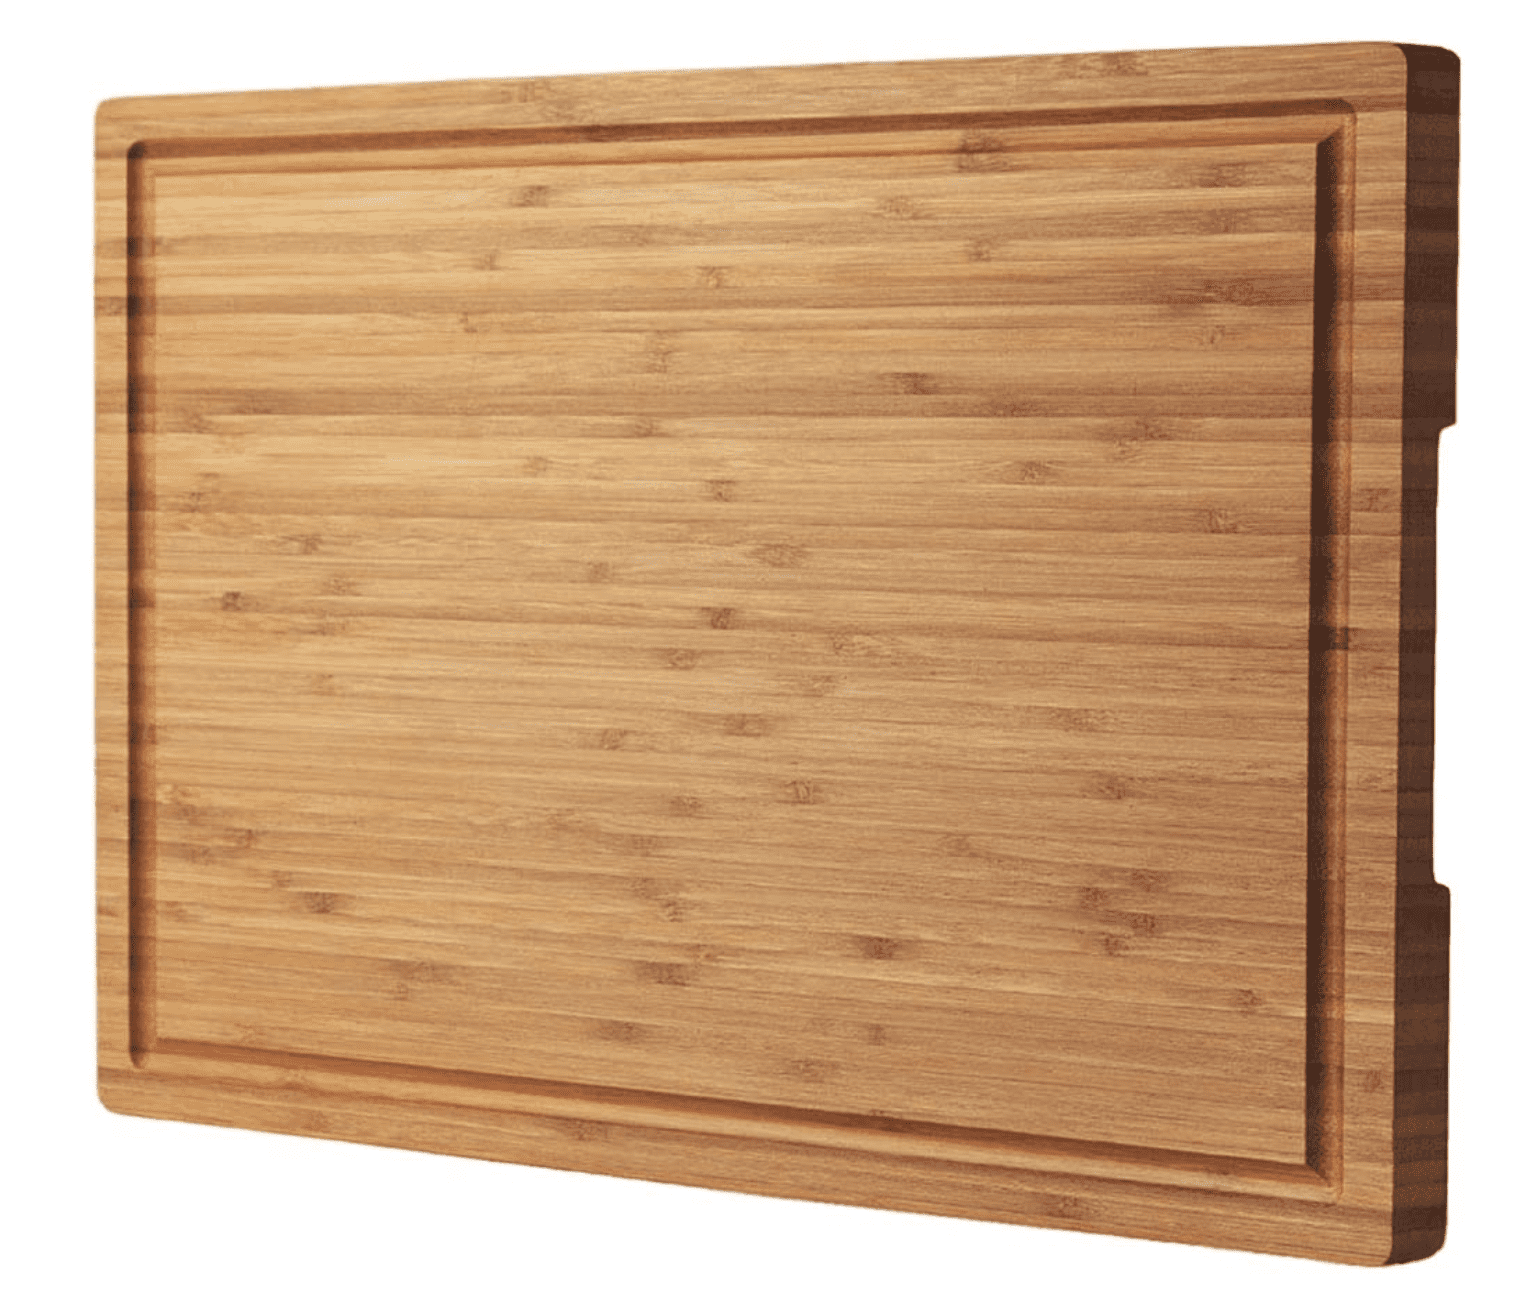 https://cdn.apartmenttherapy.info/image/upload/v1672069803/commerce/Amazon-Bamboo-Wood-Cutting-Board.png